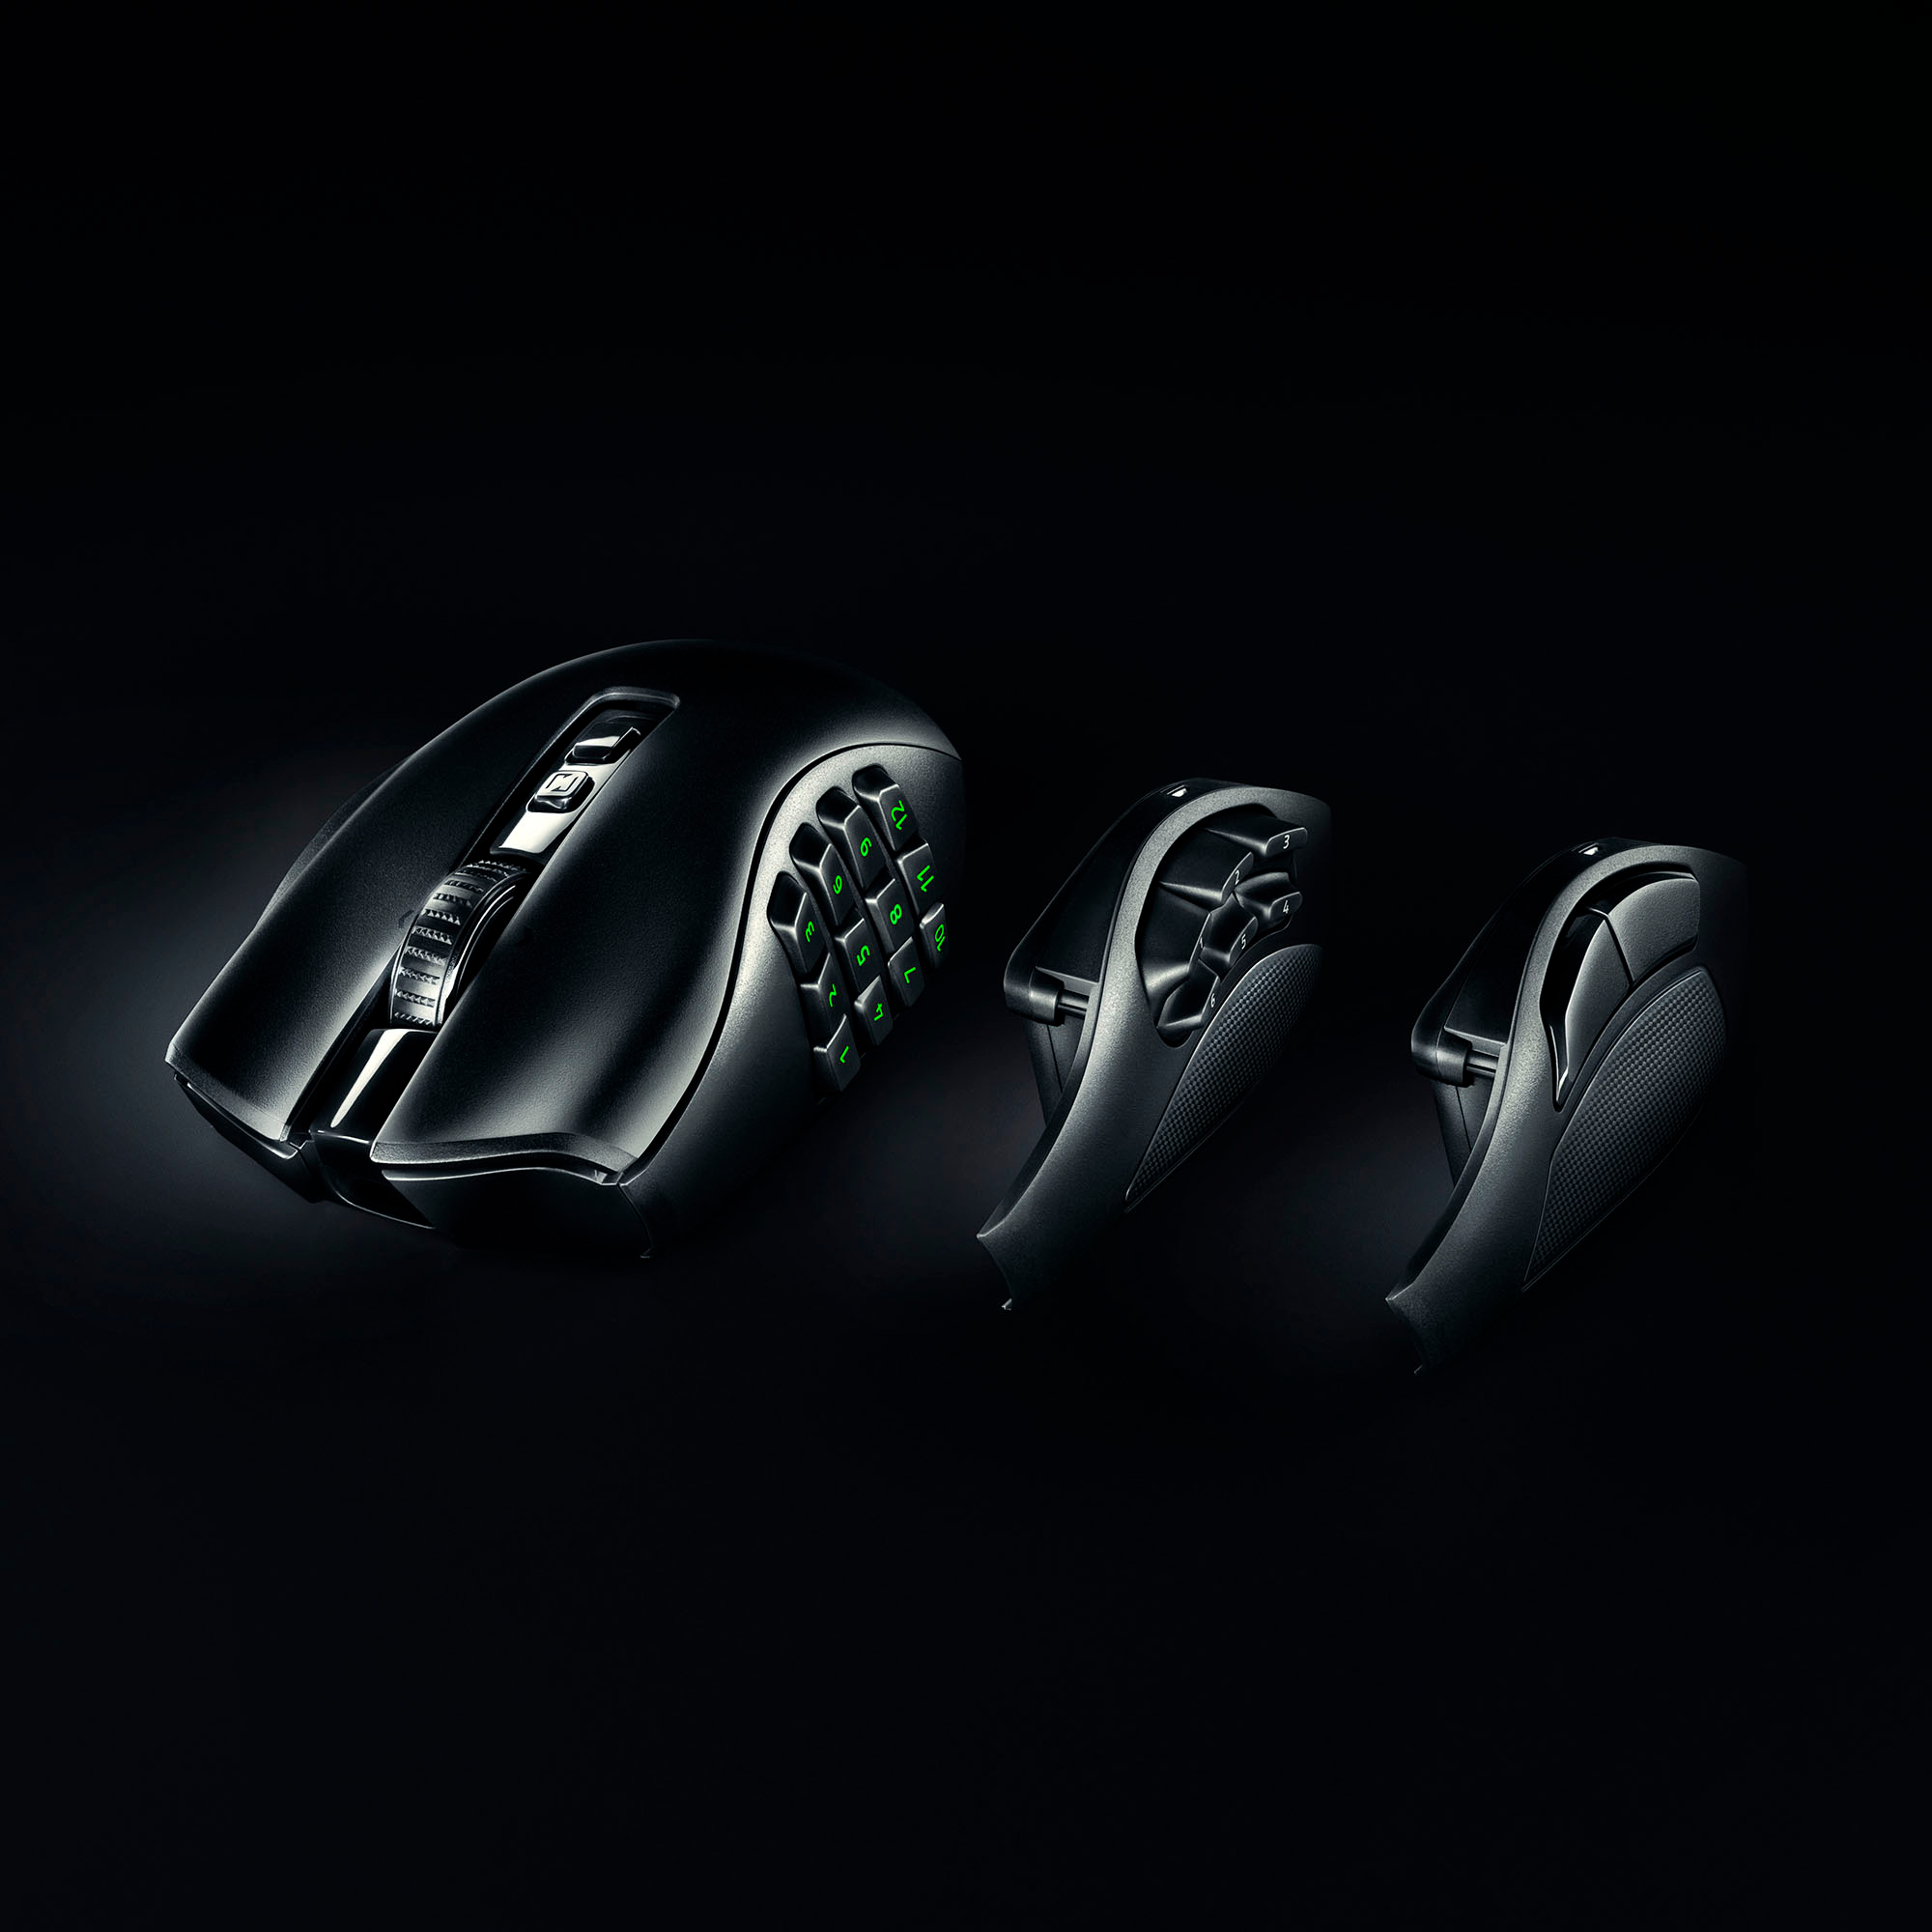 Razer Naga Pro Review - The Ultimate Multifaceted Gaming Mouse